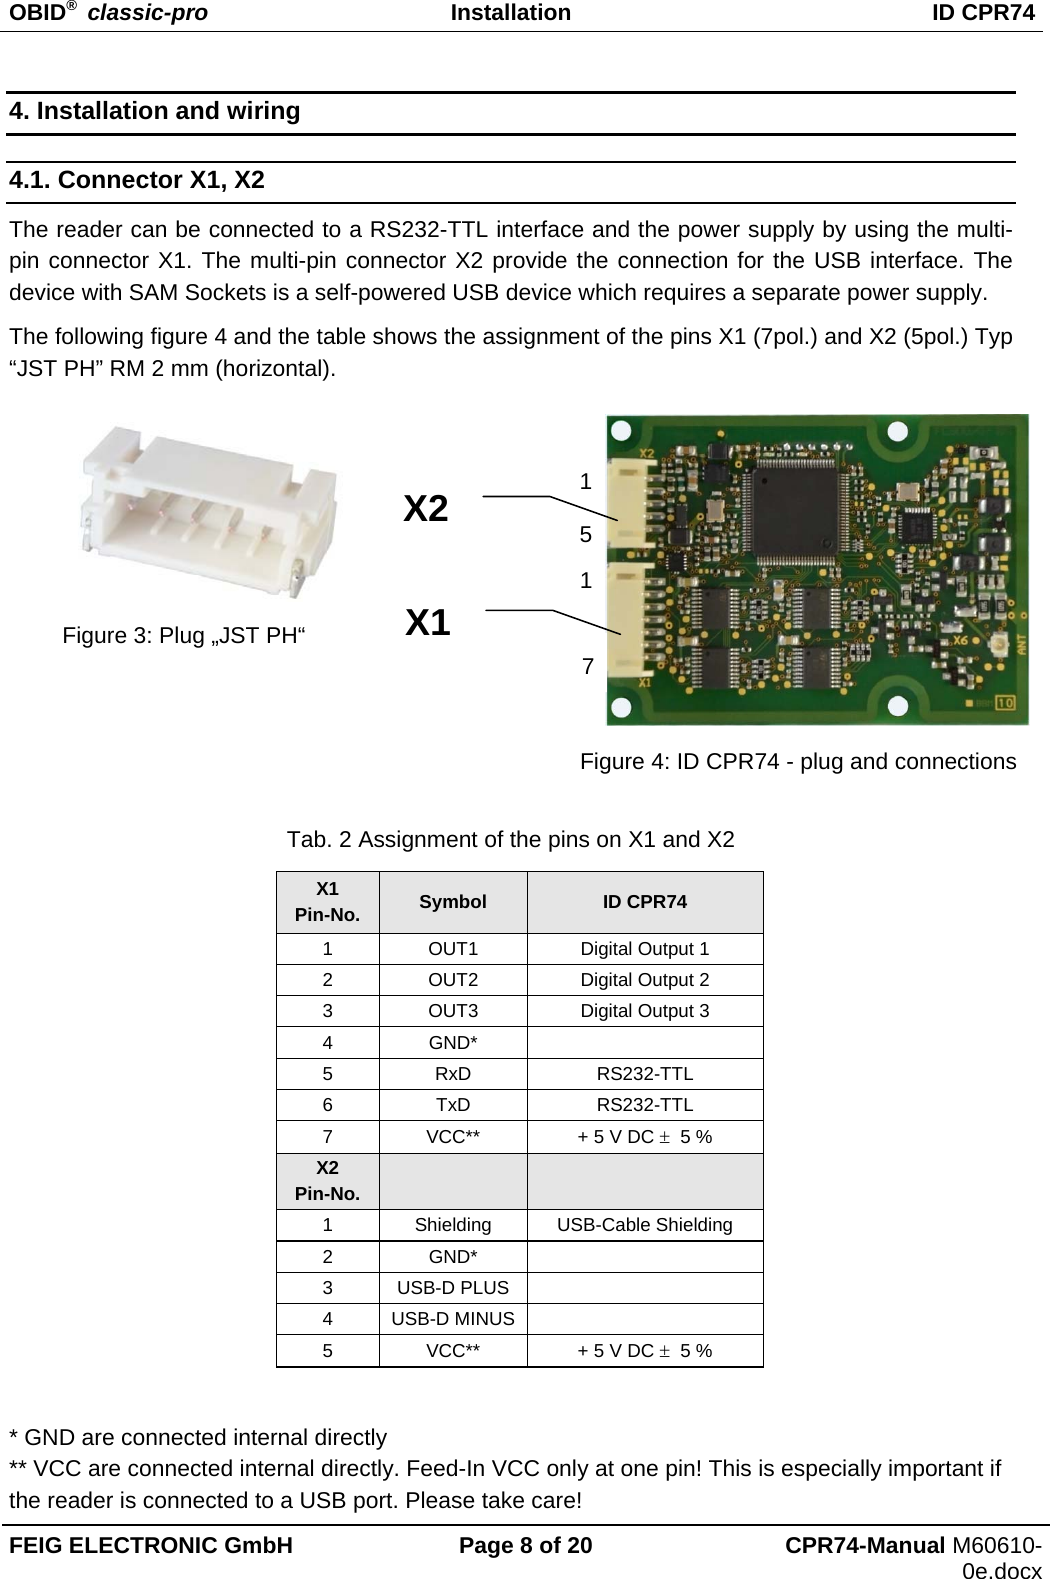 OBID®  classic-pro Installation  ID CPR74 FEIG ELECTRONIC GmbH  Page 8 of 20  CPR74-Manual M60610-0e.docx 4. Installation and wiring 4.1. Connector X1, X2 The reader can be connected to a RS232-TTL interface and the power supply by using the multi-pin connector X1. The multi-pin connector X2 provide the connection for the USB interface. The device with SAM Sockets is a self-powered USB device which requires a separate power supply. The following figure 4 and the table shows the assignment of the pins X1 (7pol.) and X2 (5pol.) Typ “JST PH” RM 2 mm (horizontal).          Tab. 2 Assignment of the pins on X1 and X2 X1 Pin-No.  Symbol  ID CPR74 1  OUT1  Digital Output 1 2  OUT2  Digital Output 2 3  OUT3  Digital Output 3 4 GND*   5 RxD  RS232-TTL 6 TxD  RS232-TTL 7 VCC**  + 5 V DC   5 % X2 Pin-No.    1 Shielding USB-Cable Shielding 2 GND*   3 USB-D PLUS   4 USB-D MINUS   5 VCC**  + 5 V DC   5 %  * GND are connected internal directly  ** VCC are connected internal directly. Feed-In VCC only at one pin! This is especially important if the reader is connected to a USB port. Please take care! X1 1 5 1 7 X2 Figure 3: Plug „JST PH“ Figure 4: ID CPR74 - plug and connections